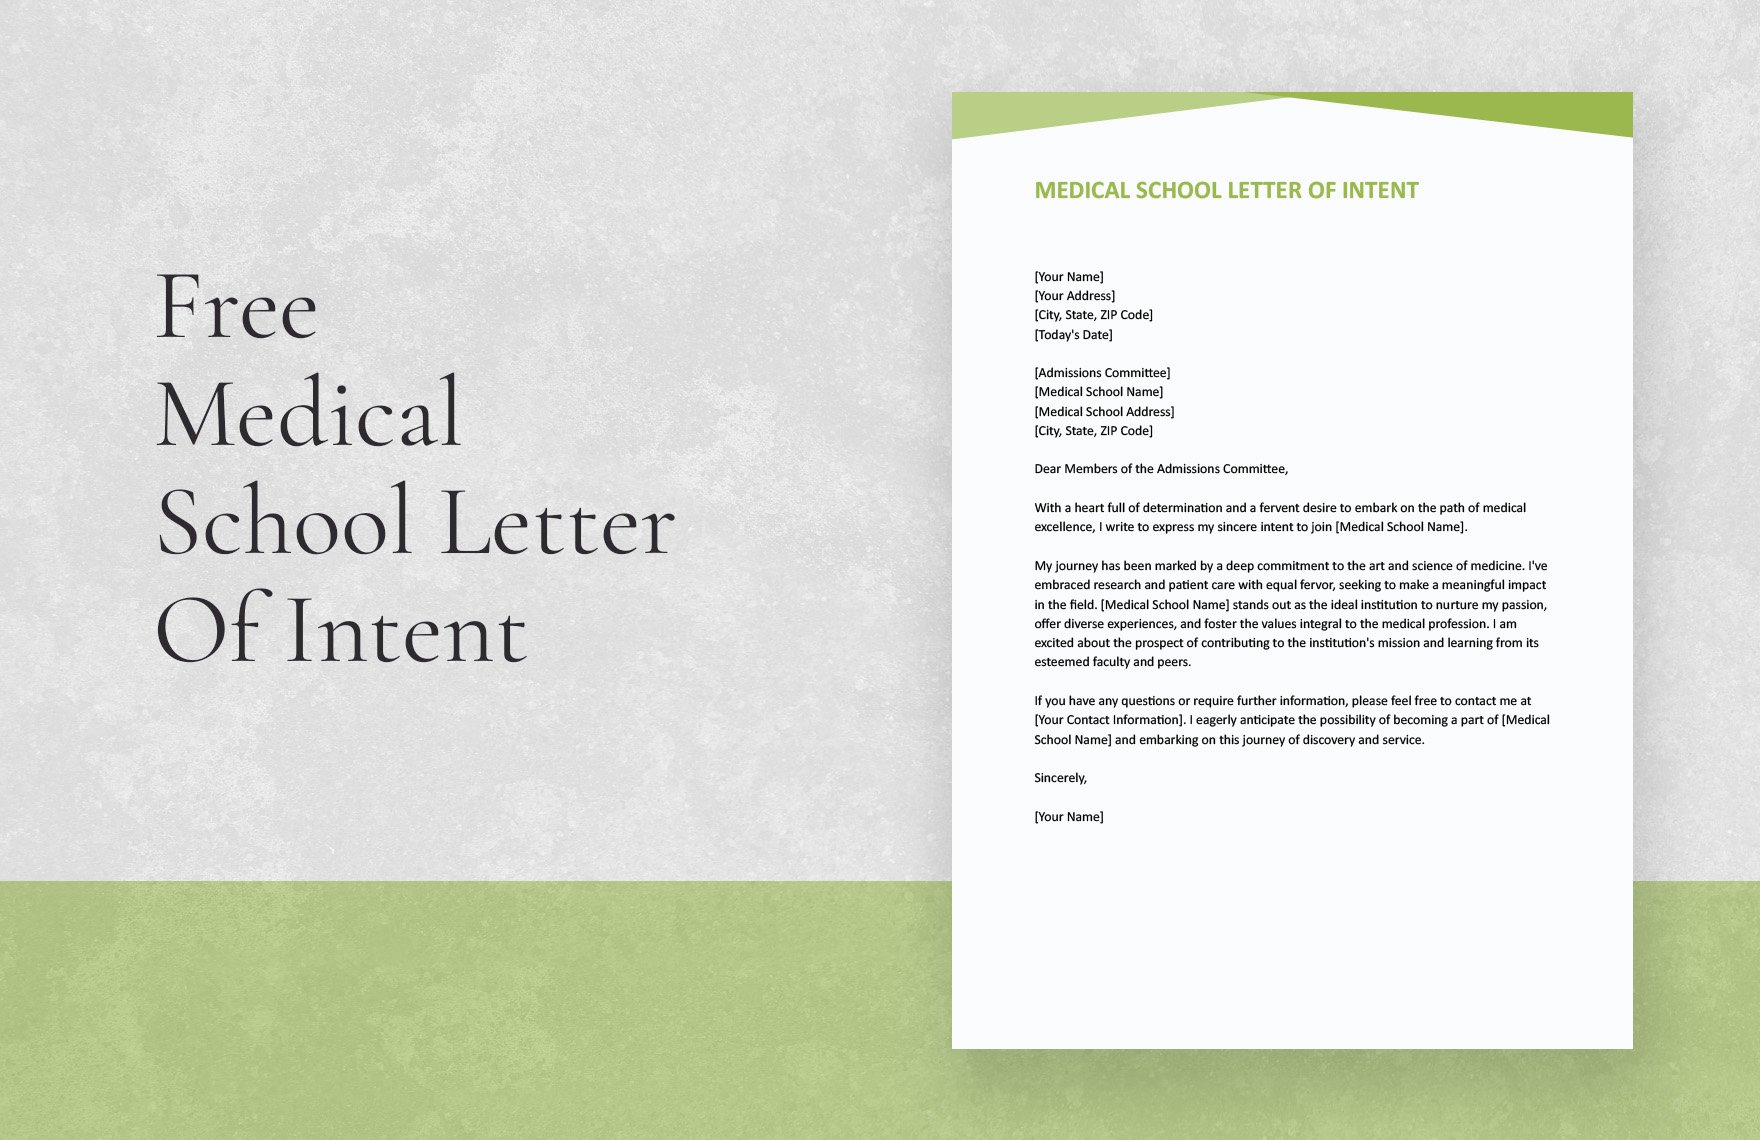 Medical School Letter Of Intent in Word, Google Docs